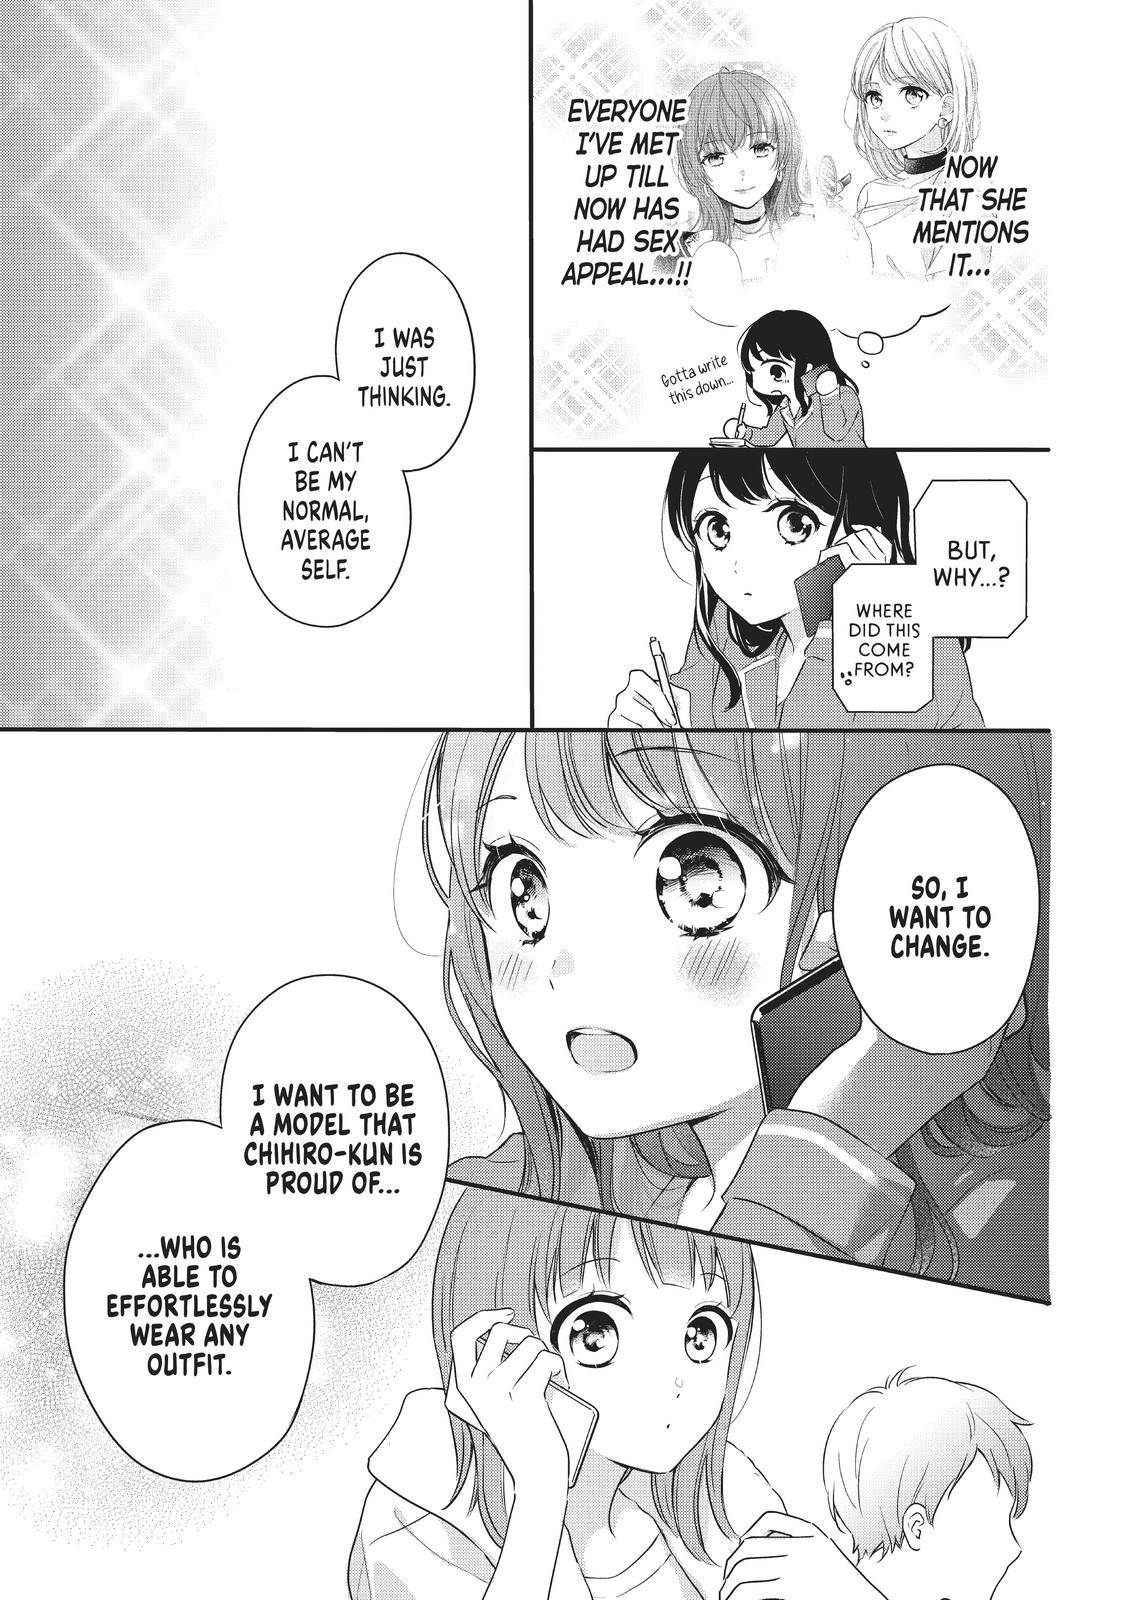 Chihiro-kun Only Has Eyes for Me - chapter 16 - #3